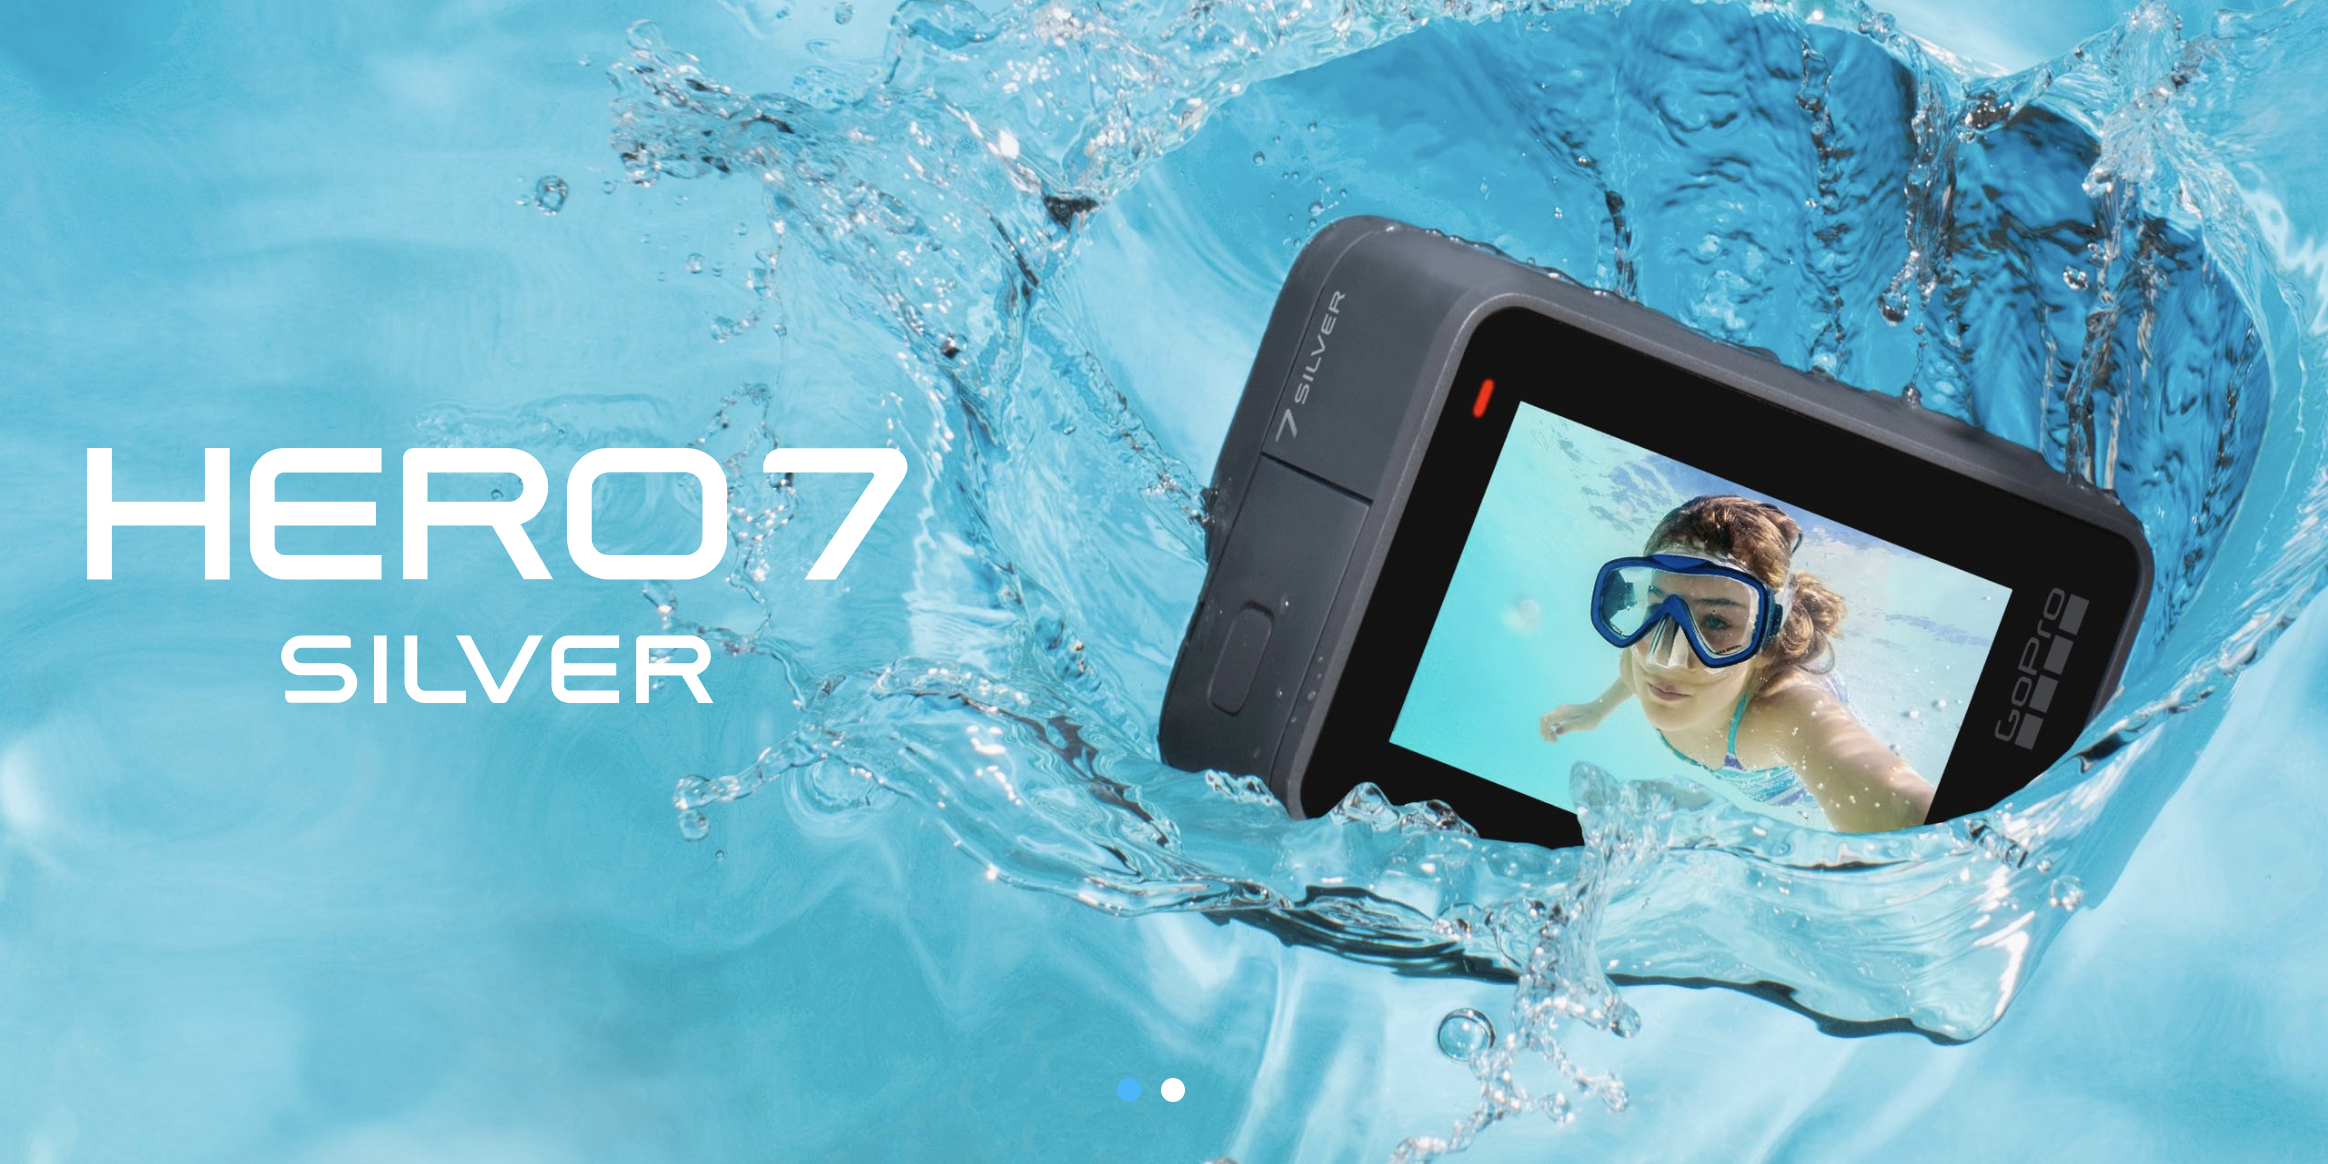 The 4K GoPro HERO7 Silver Action Cam just hit the Amazon all-time low